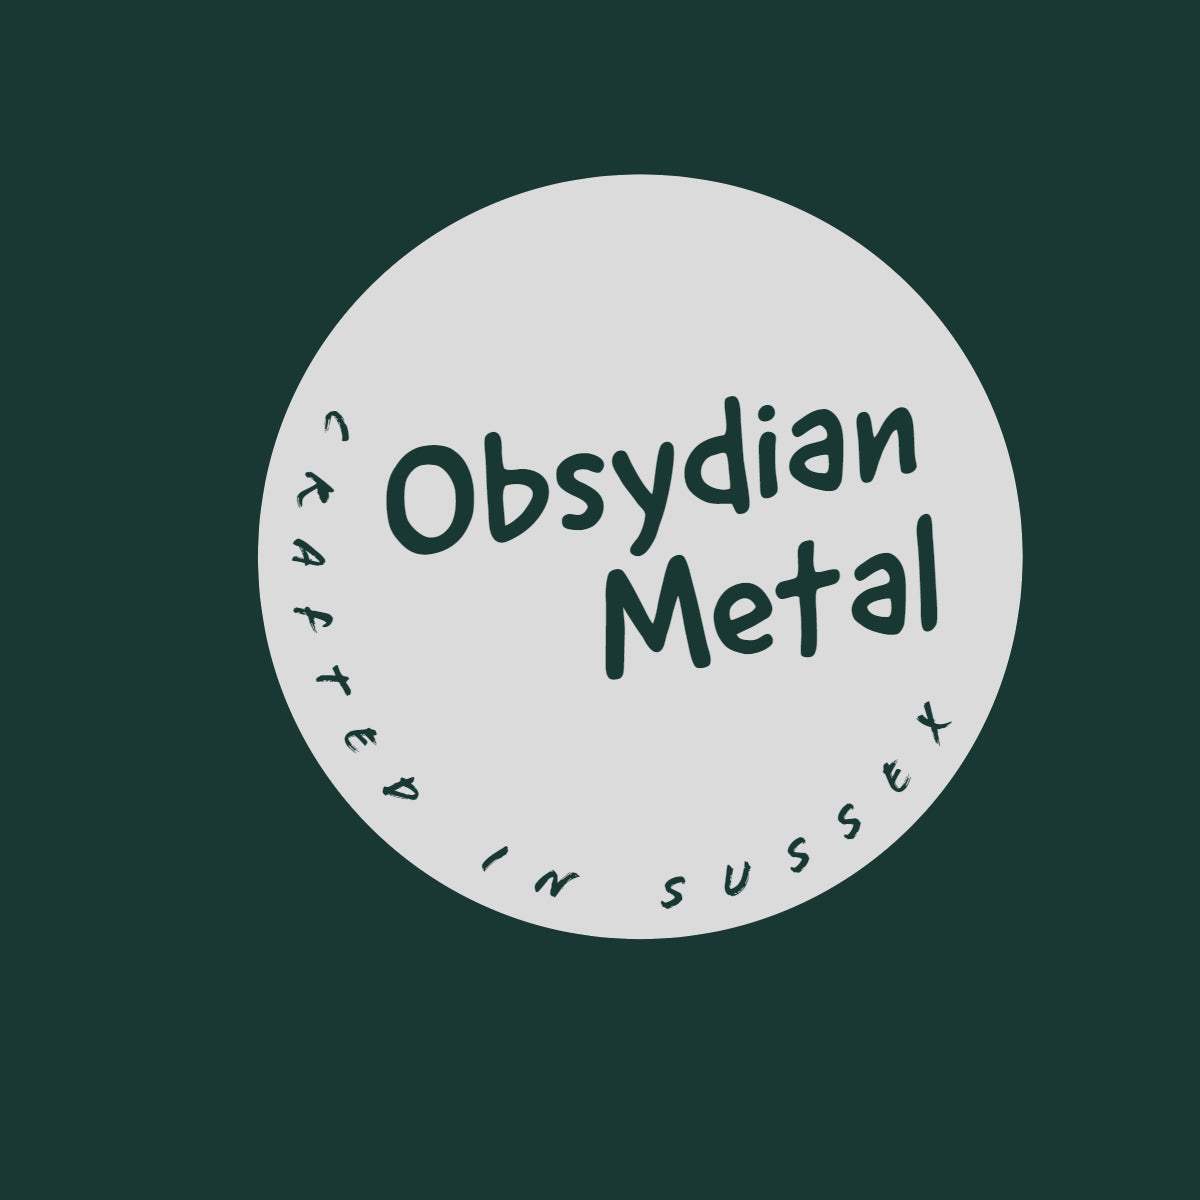 Load video: Welcome to Obsydian Metal